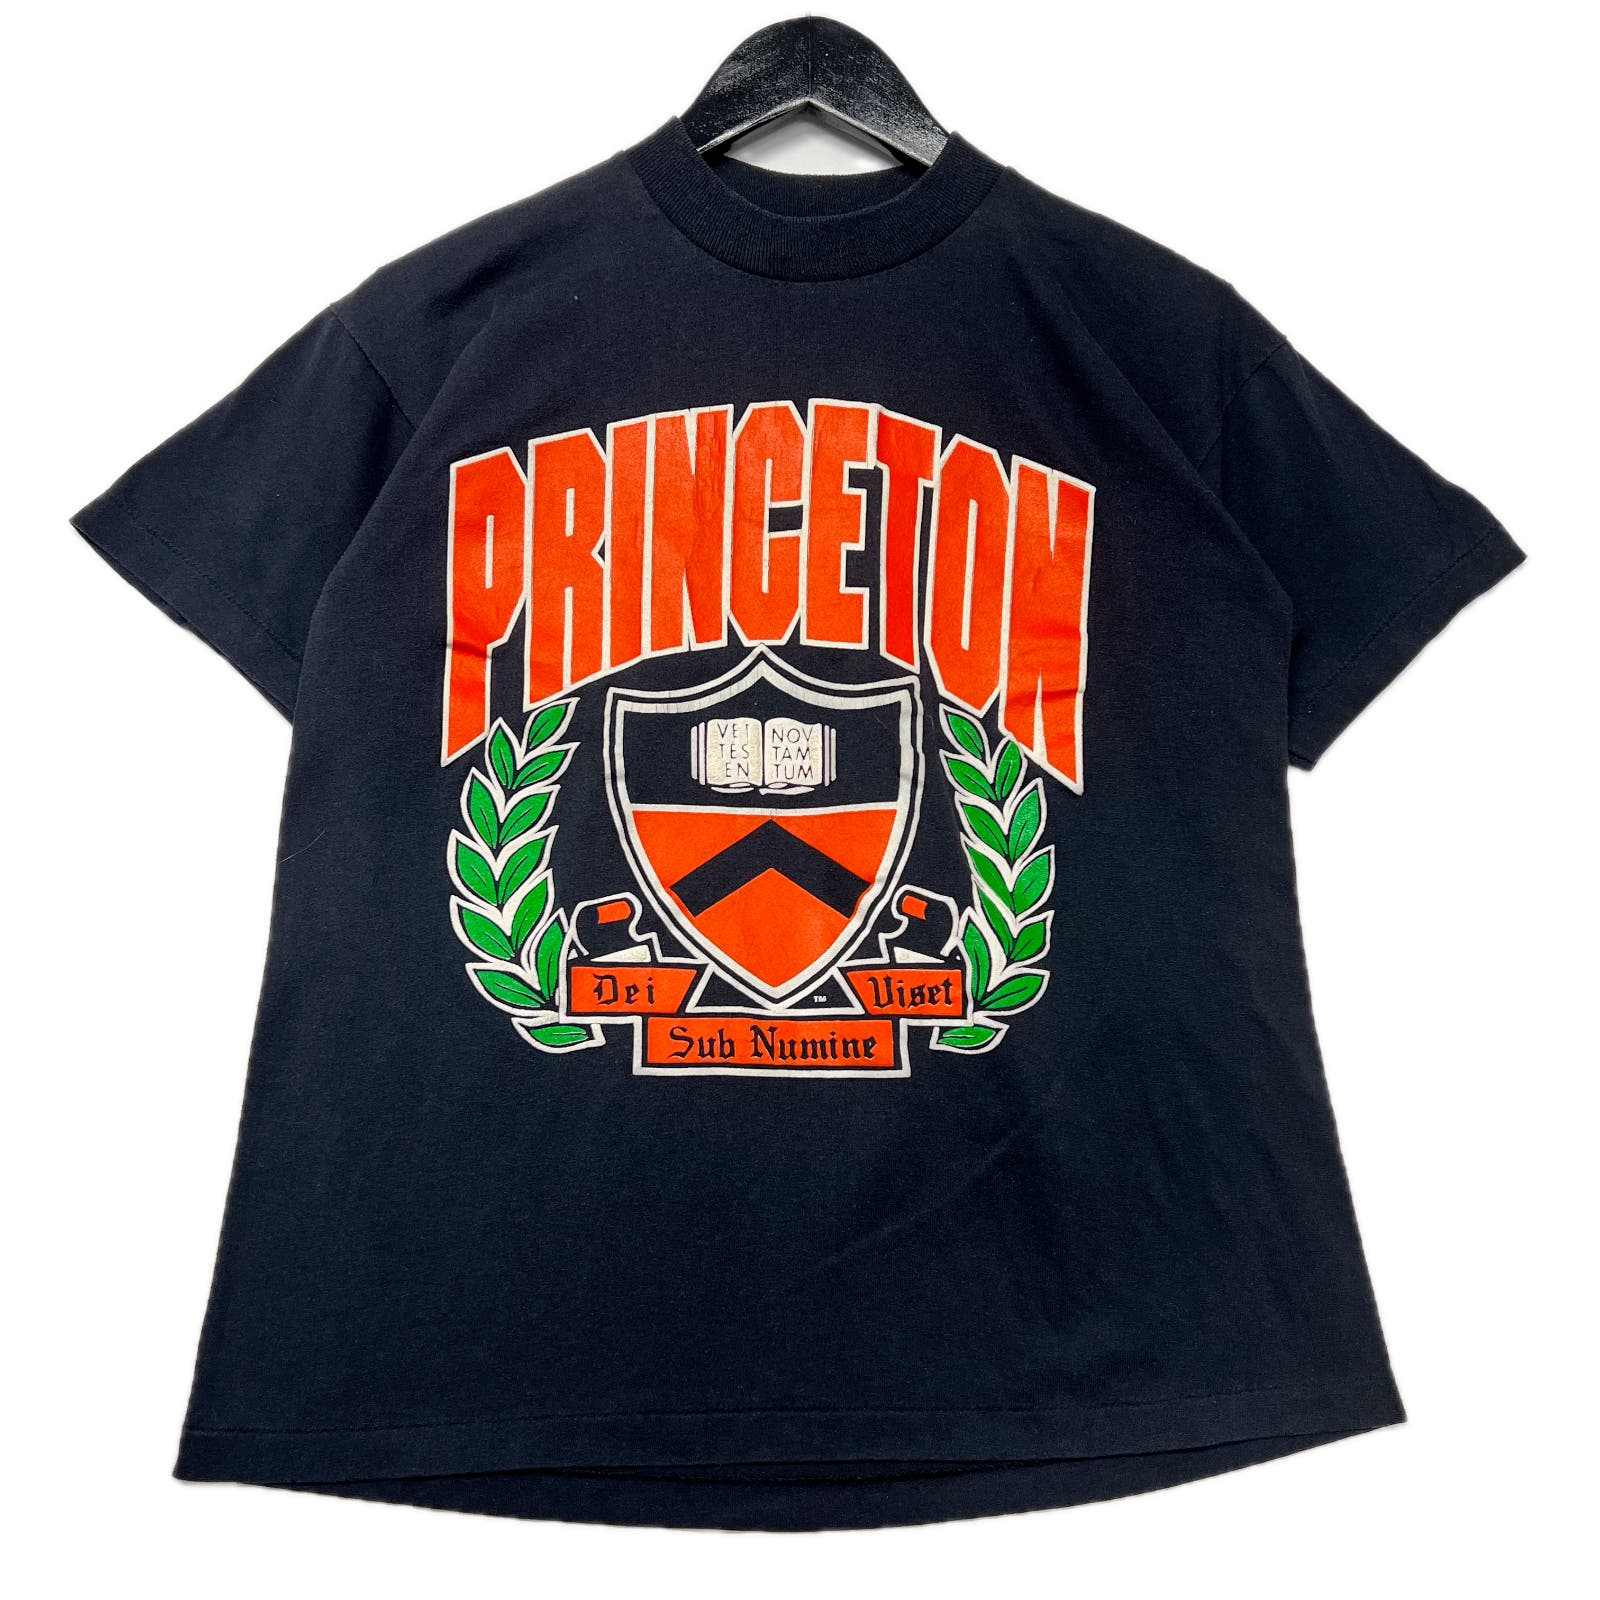 Vintage Princeton University Spell Out Graphic Black T-Shirt Size Small